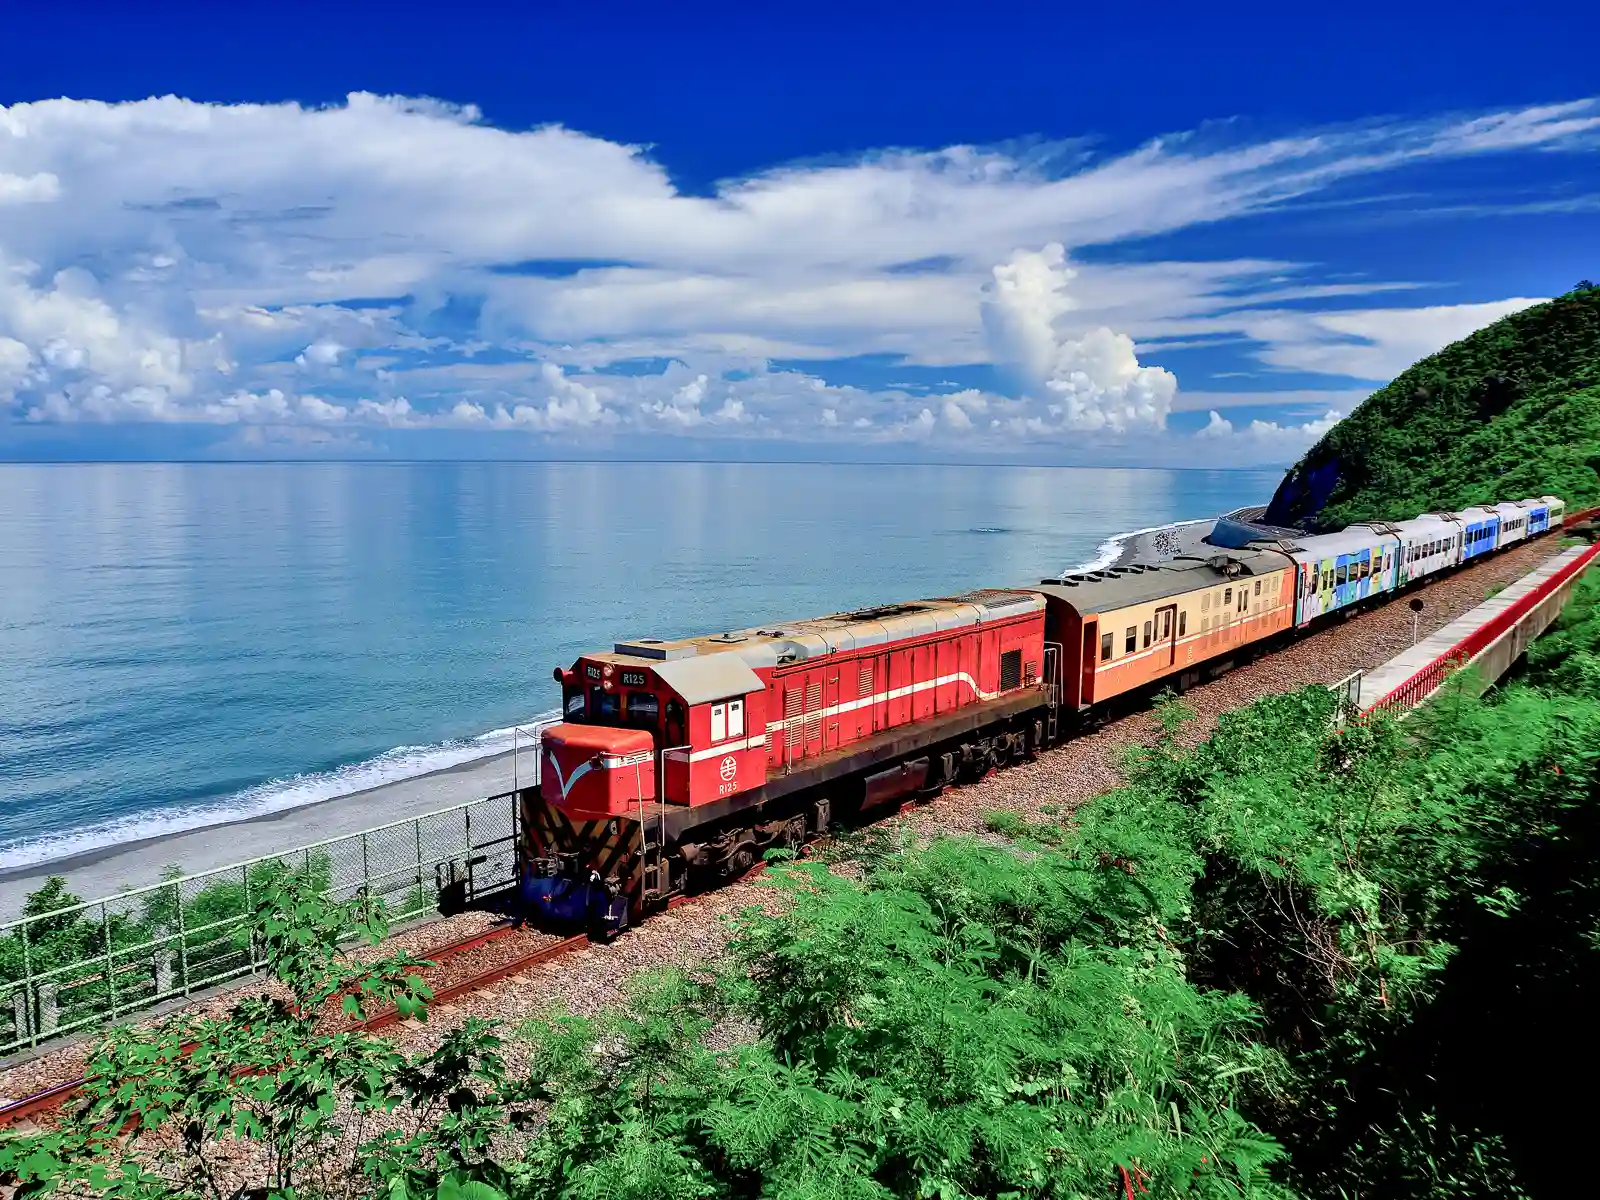 A colorful train traveling in front of the Pacific Ocean.